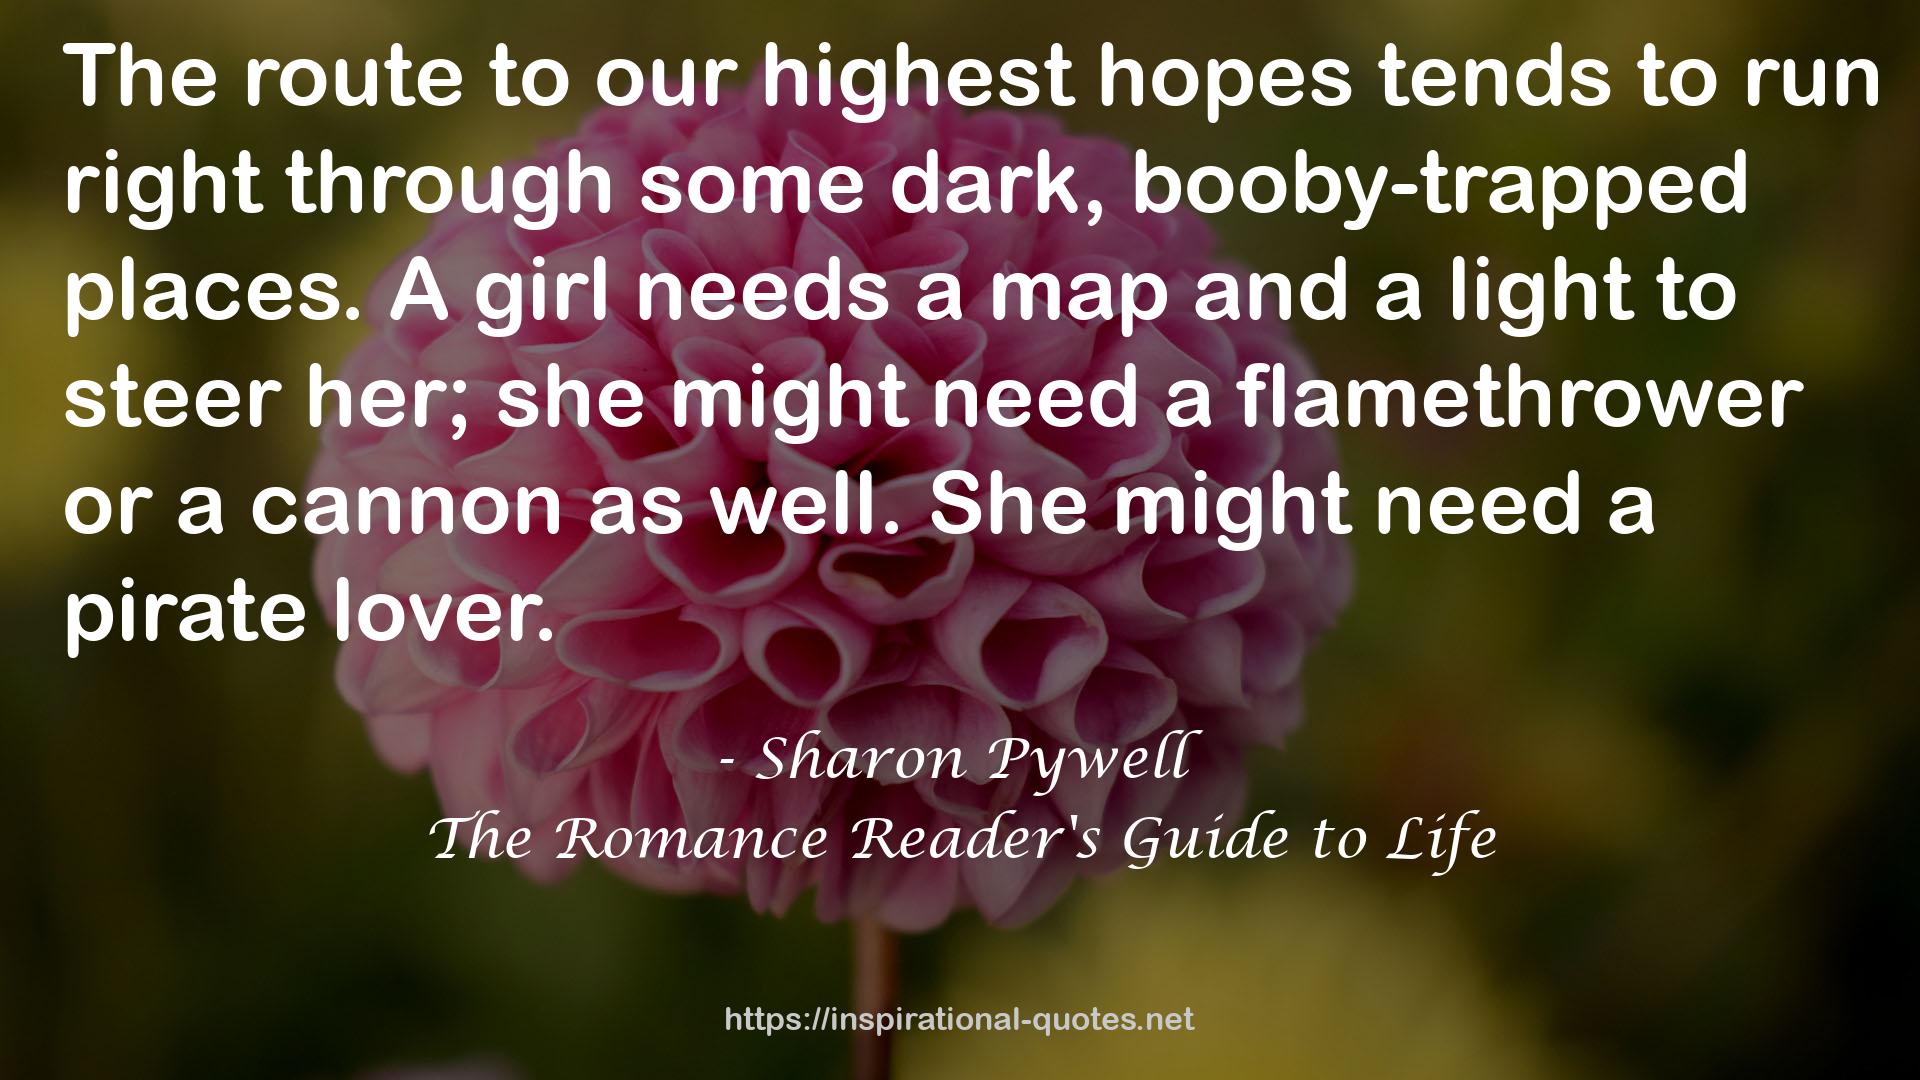 Sharon Pywell QUOTES